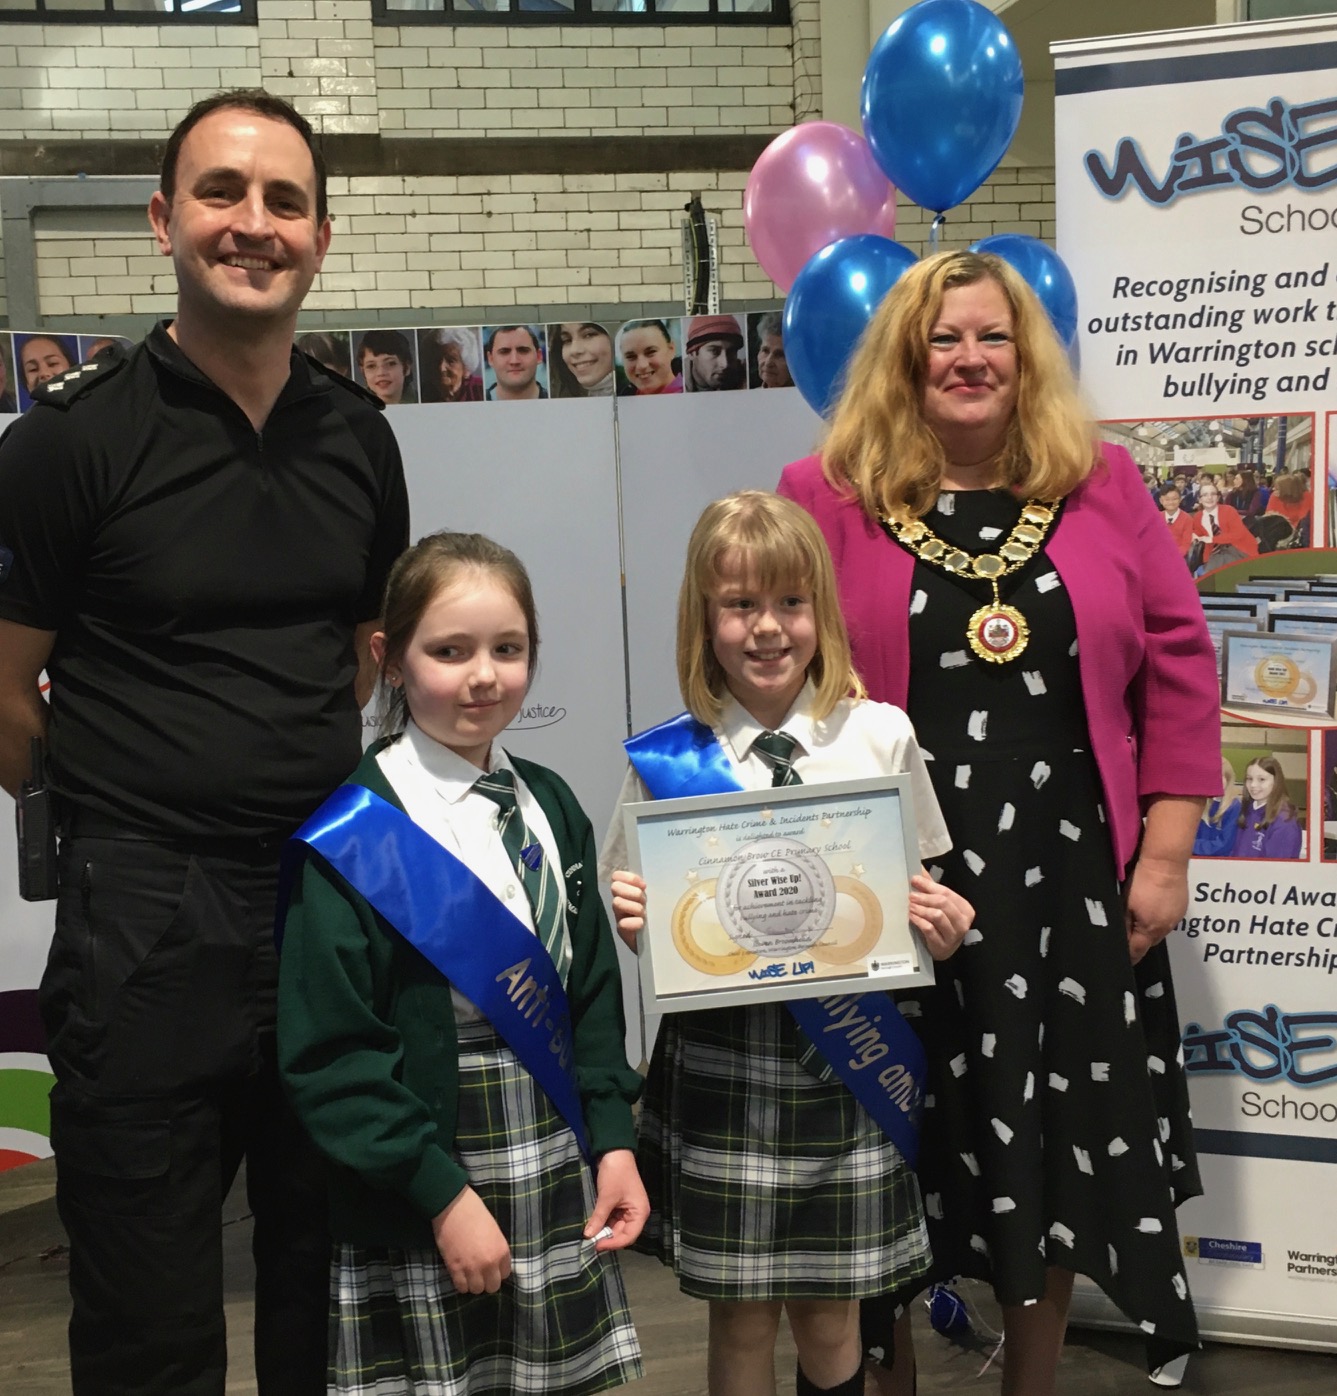 Chief Inspector Simon Meegan and Mayor of Warrington, Cllr Wendy Johnson with Warrington school children at the Wise Up Awards.